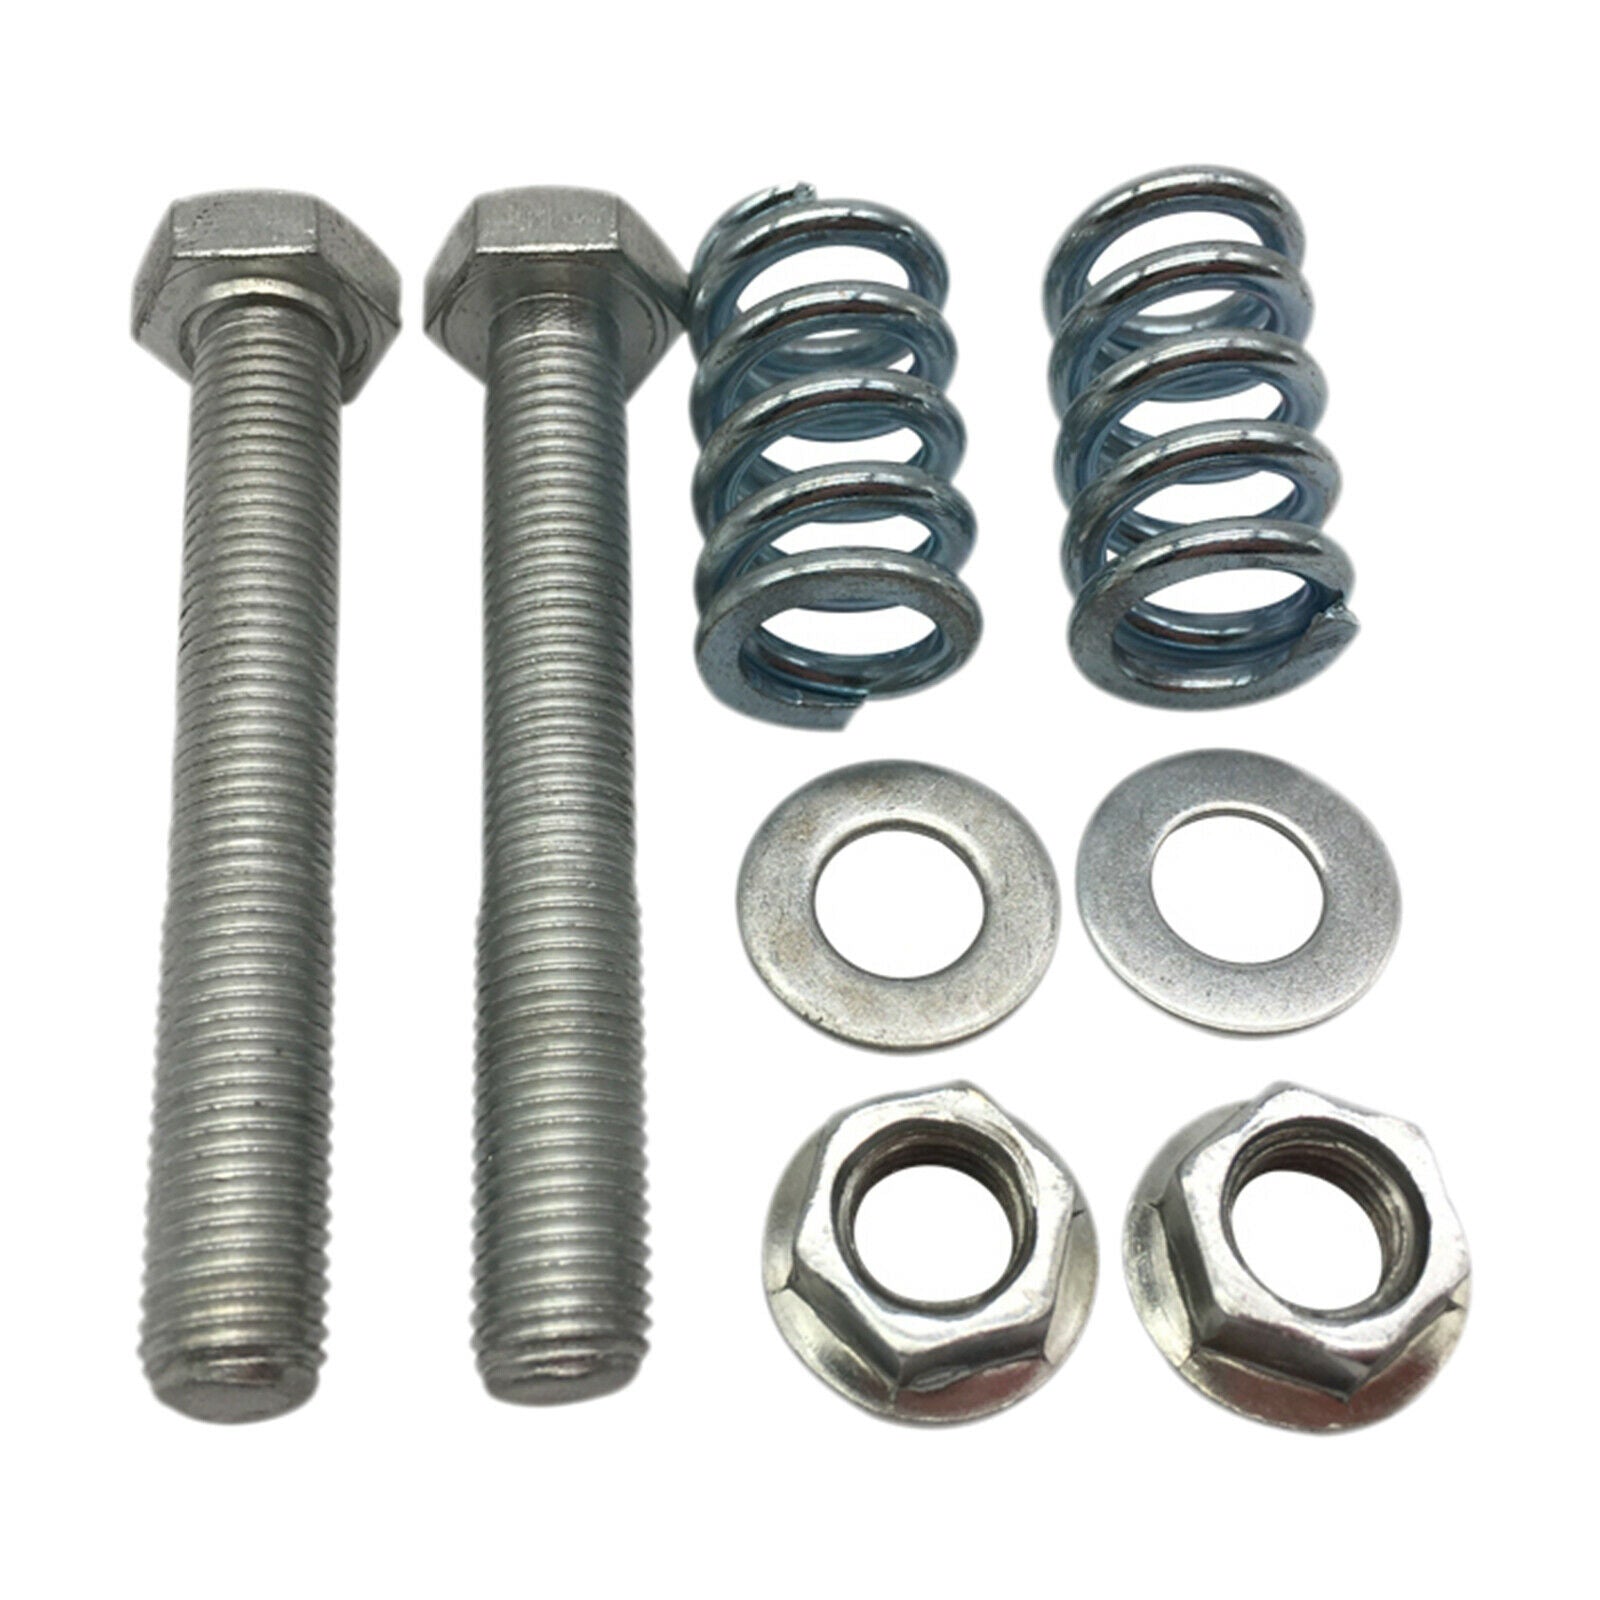 2Pcs M10x1.25 Exhaust Bolt and Spring Nut Hardware Kit Repair Replacement